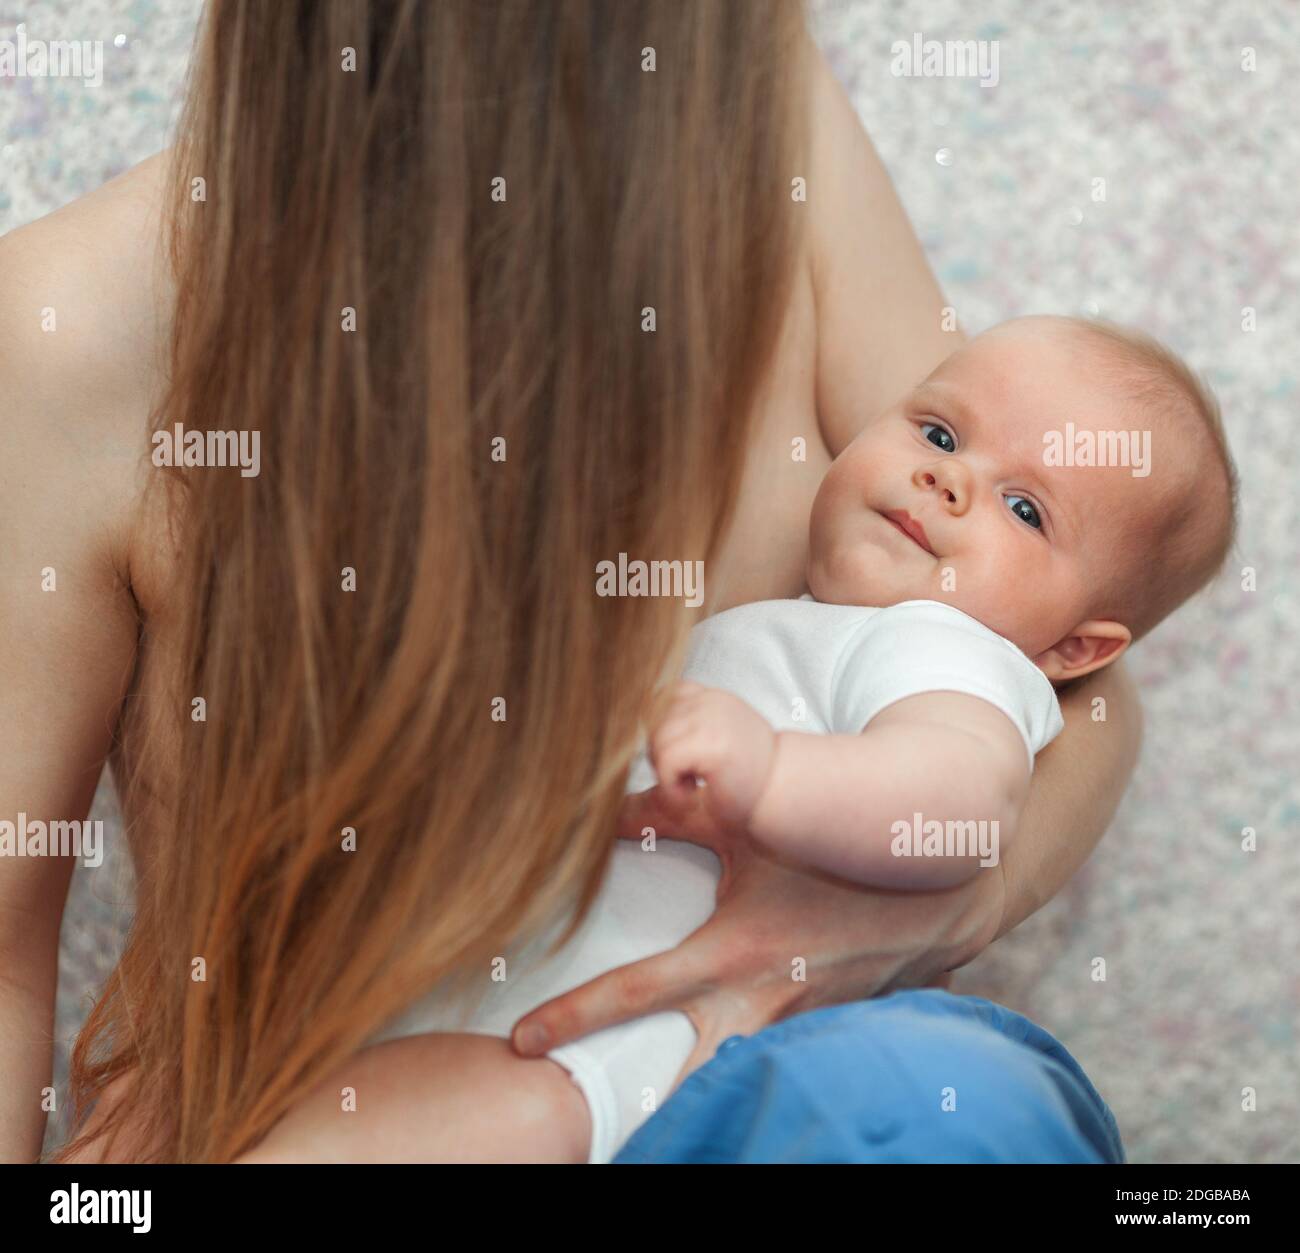 Baby in hands of loving and caring mother Stock Photo